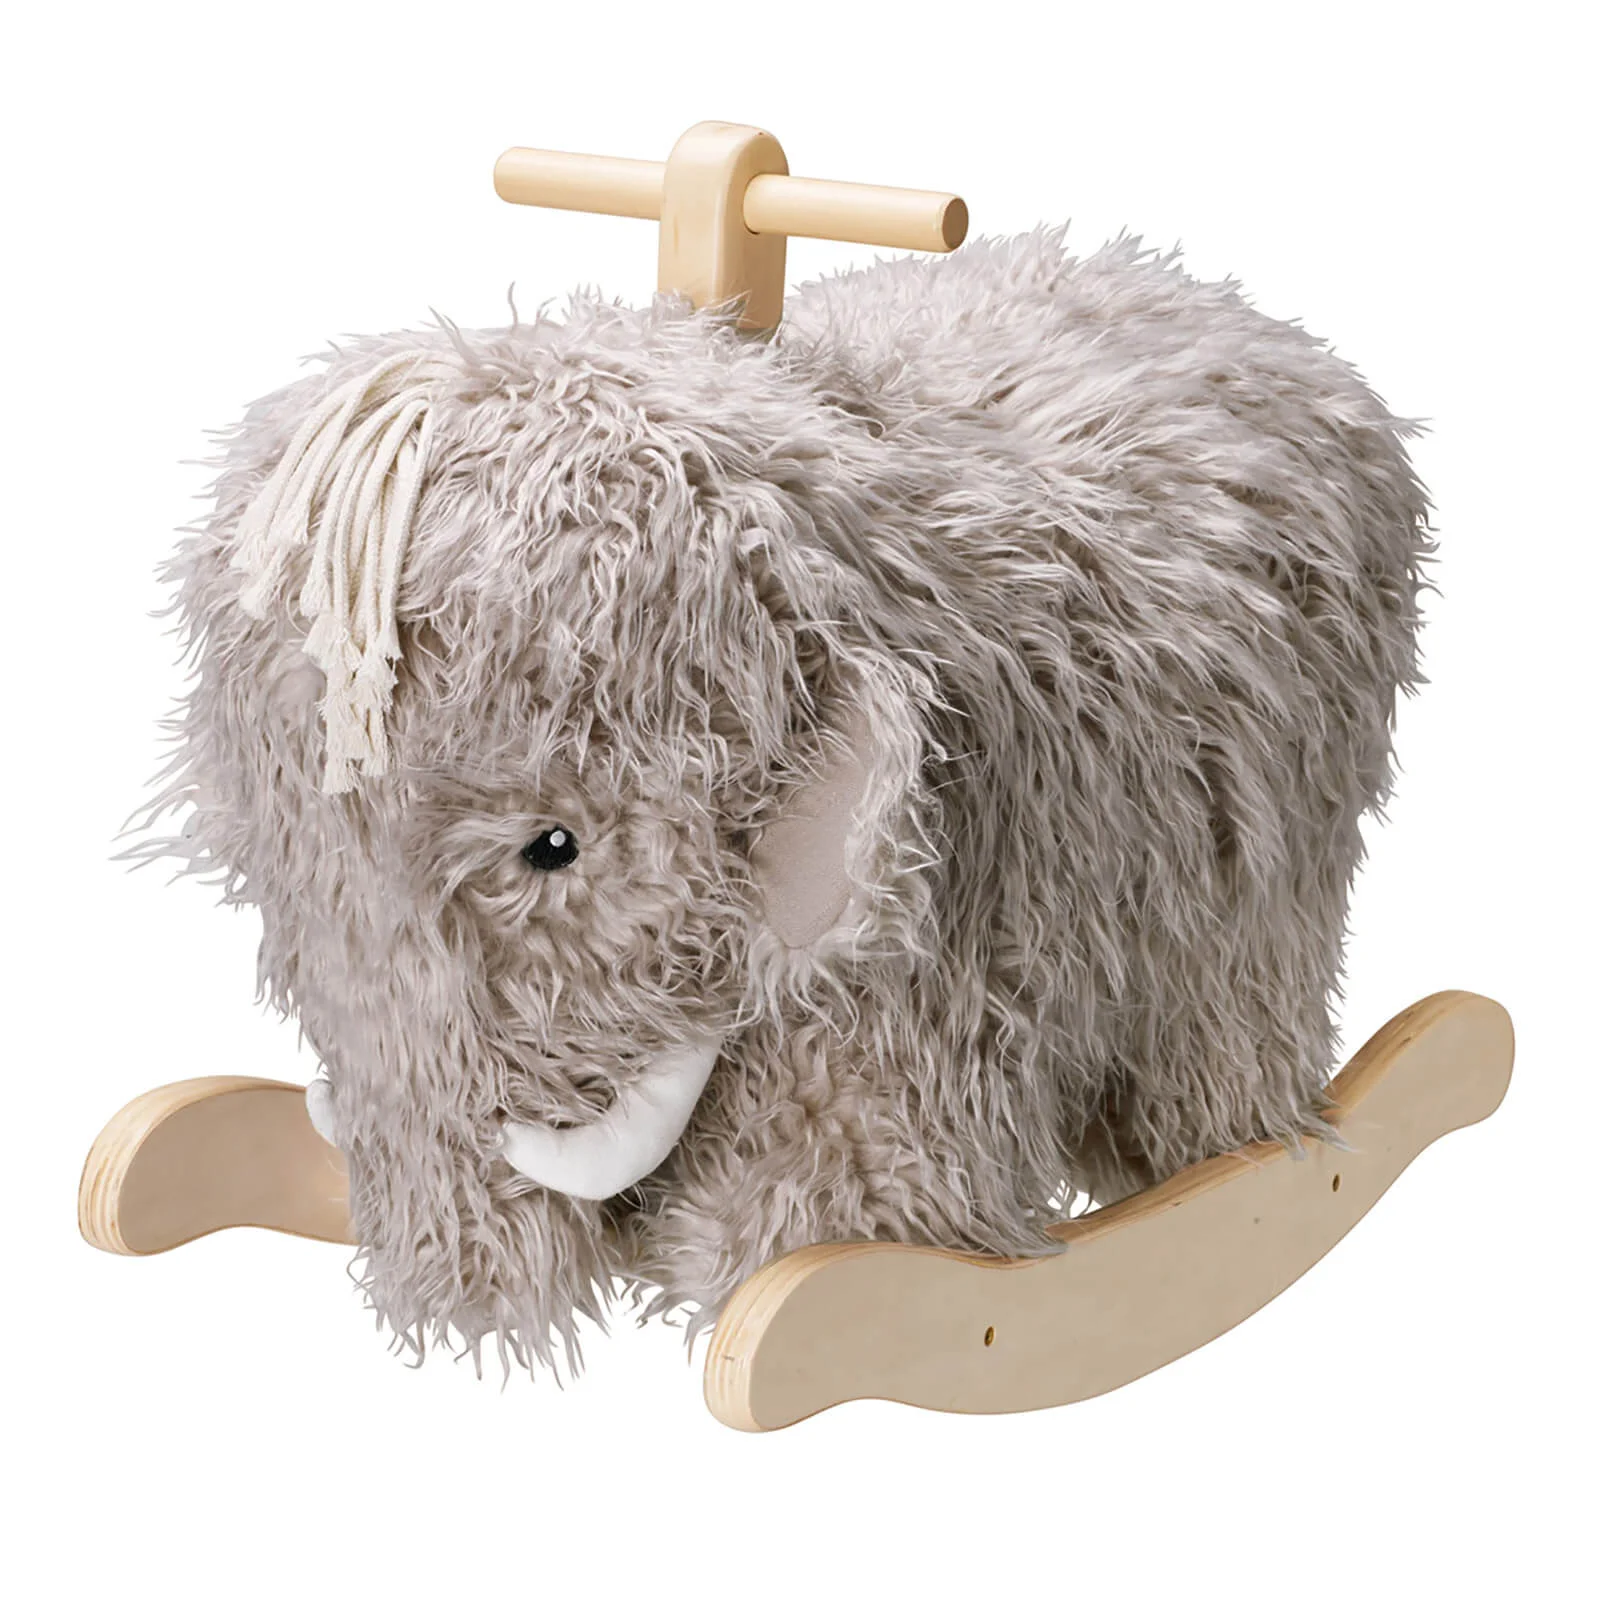 Kids Concept Neo Rocking Horse - Mammoth Image 1